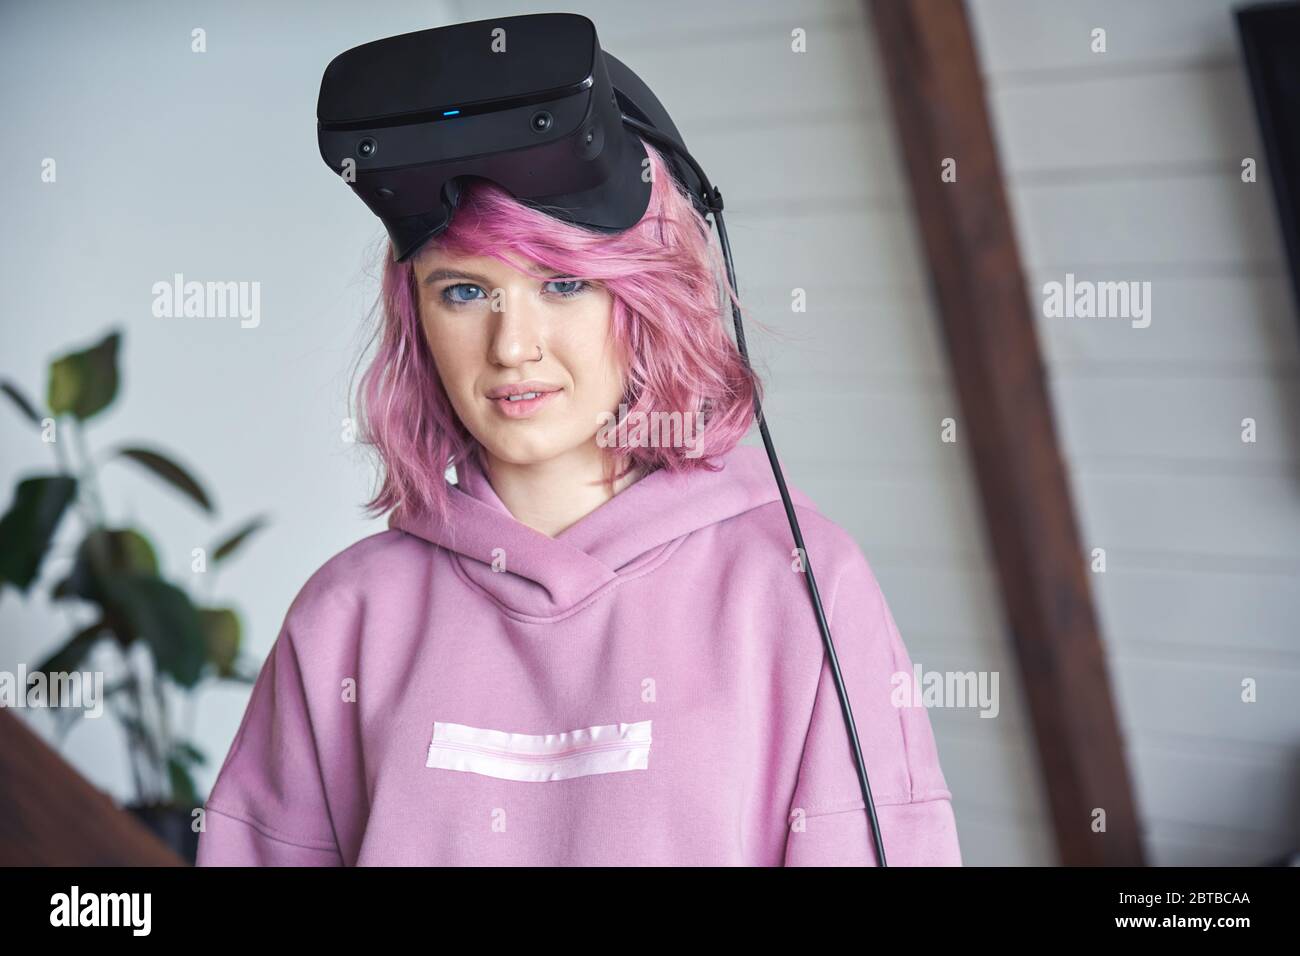 Hipster teen girl with pink hair wearing vr headset on head looking at camera. Stock Photo